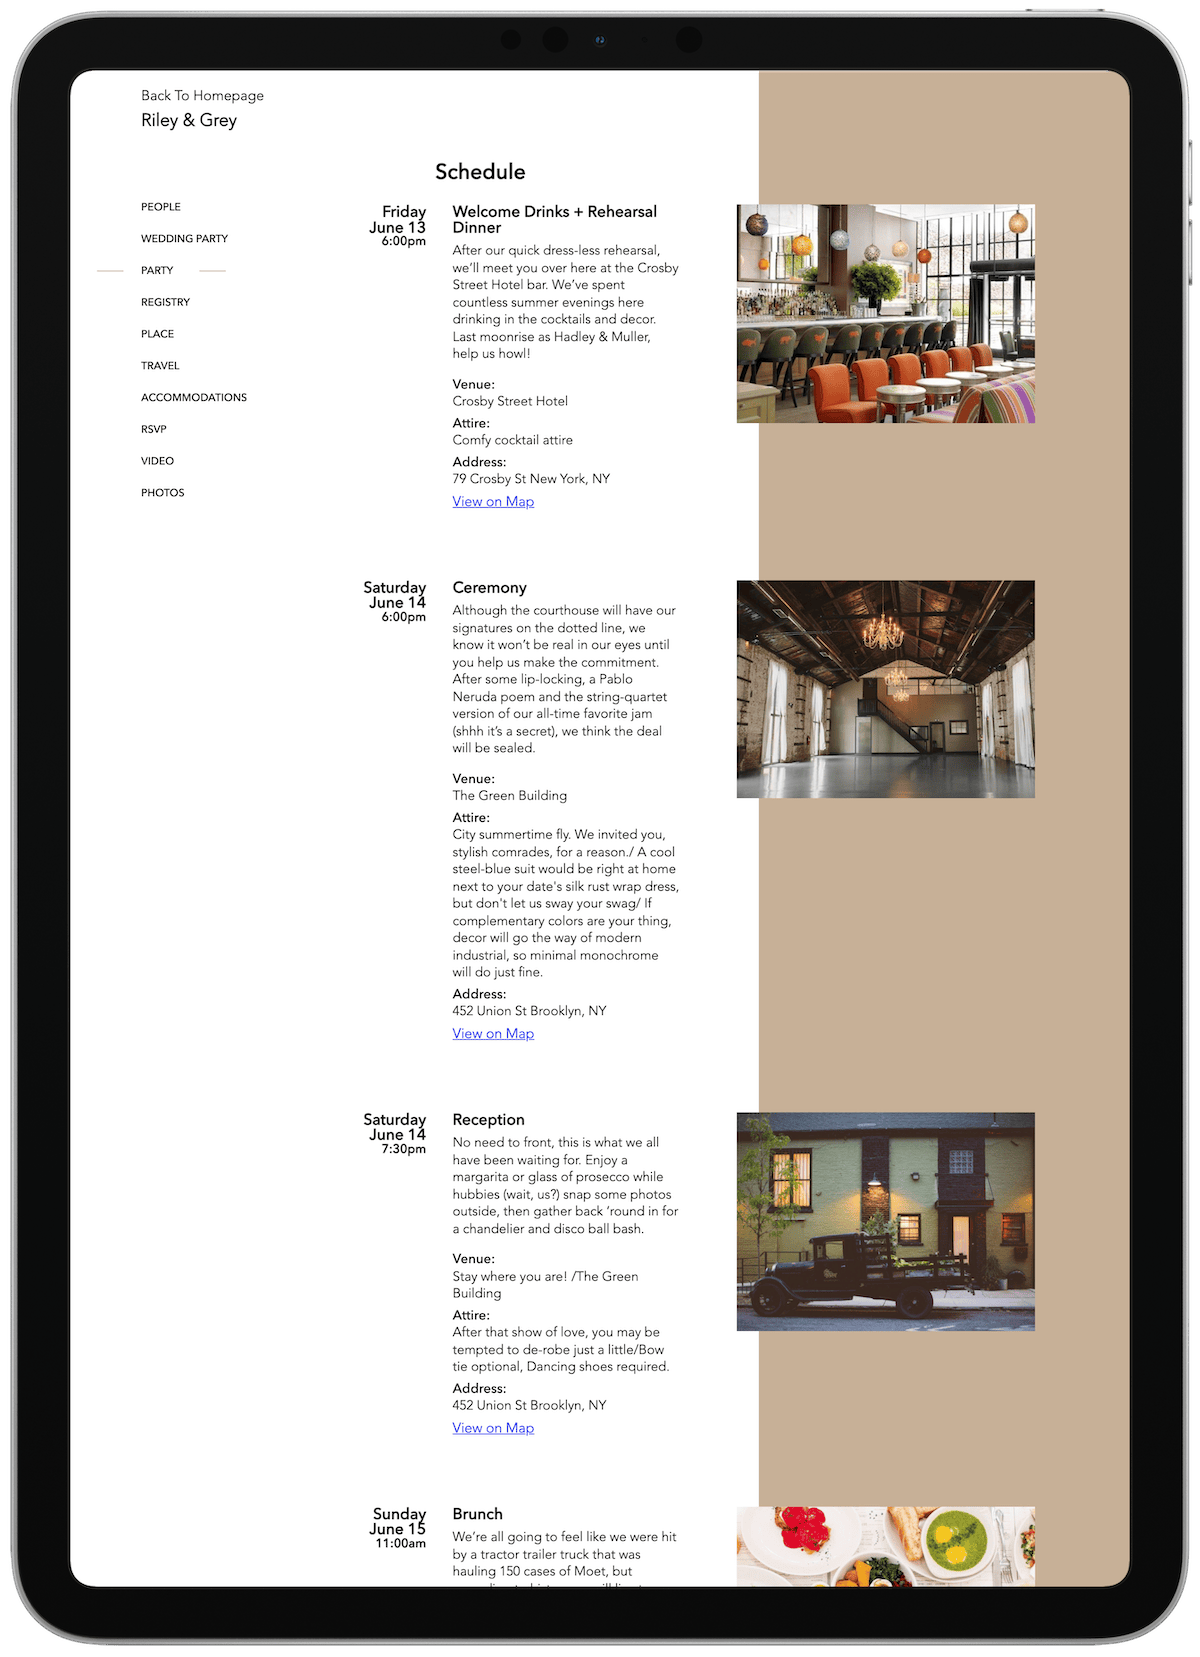 Wedding website schedule page displayed within an iMac device